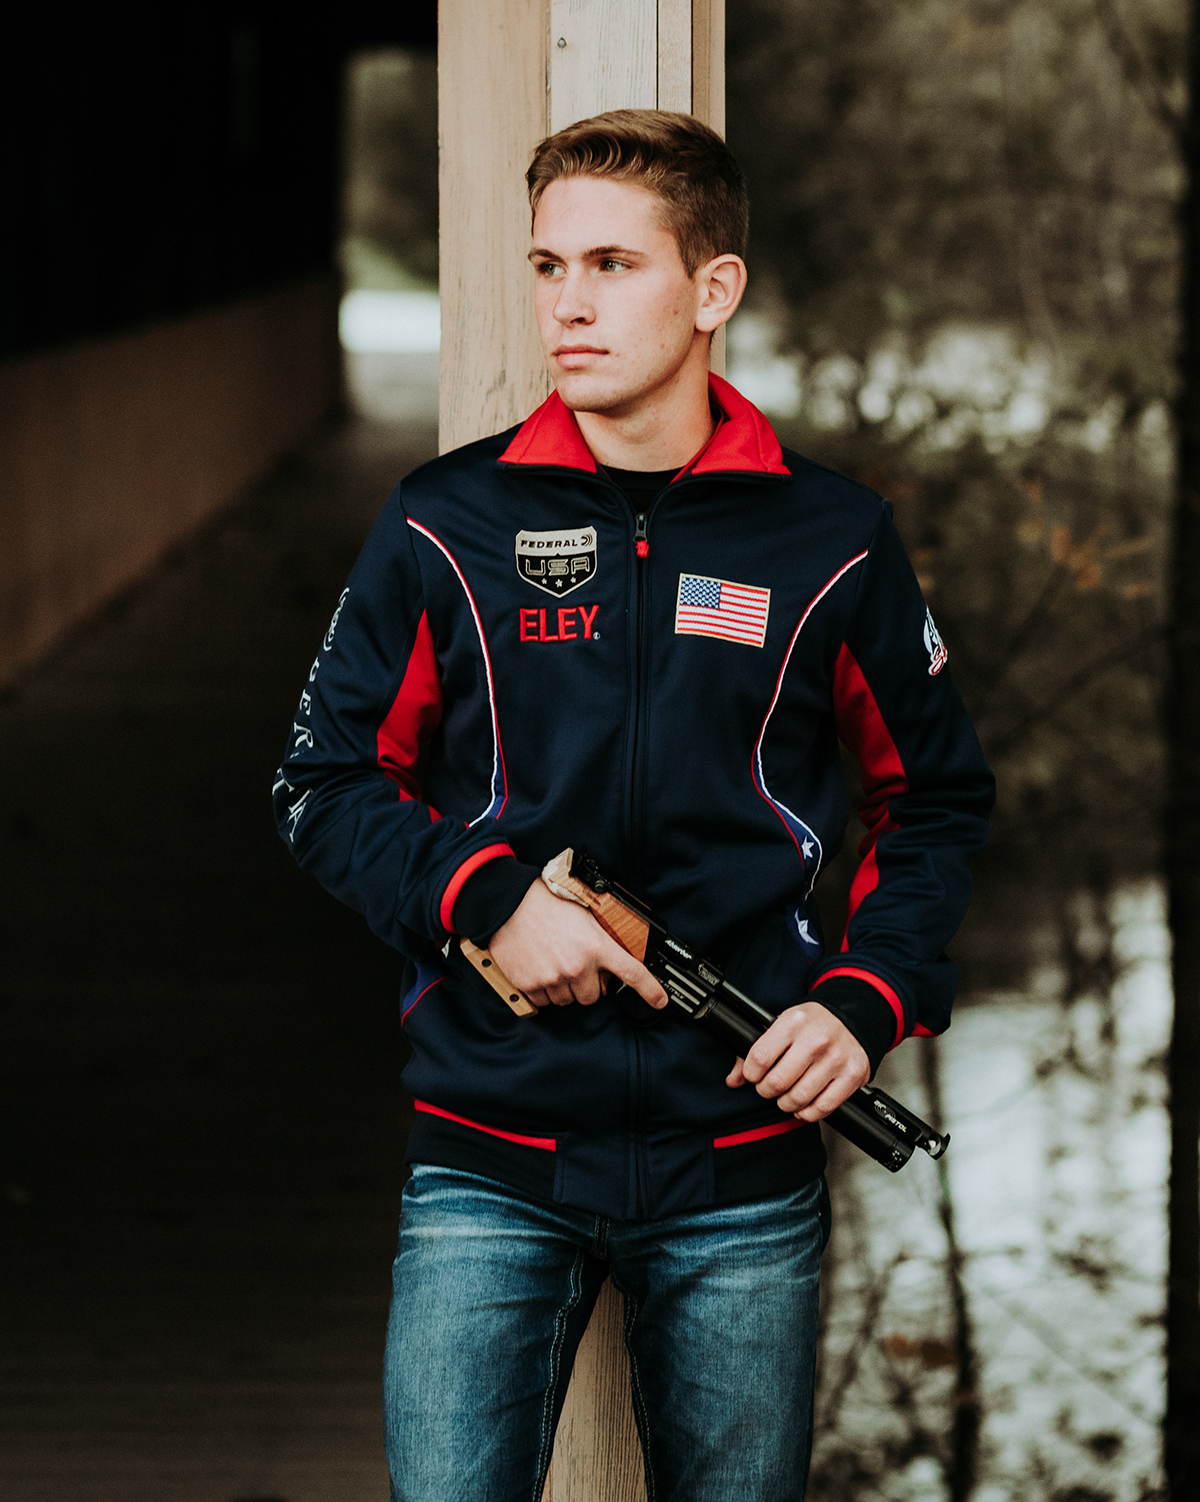 Dorsten is a member of the National Junior Pistol Team and has competed internationally.